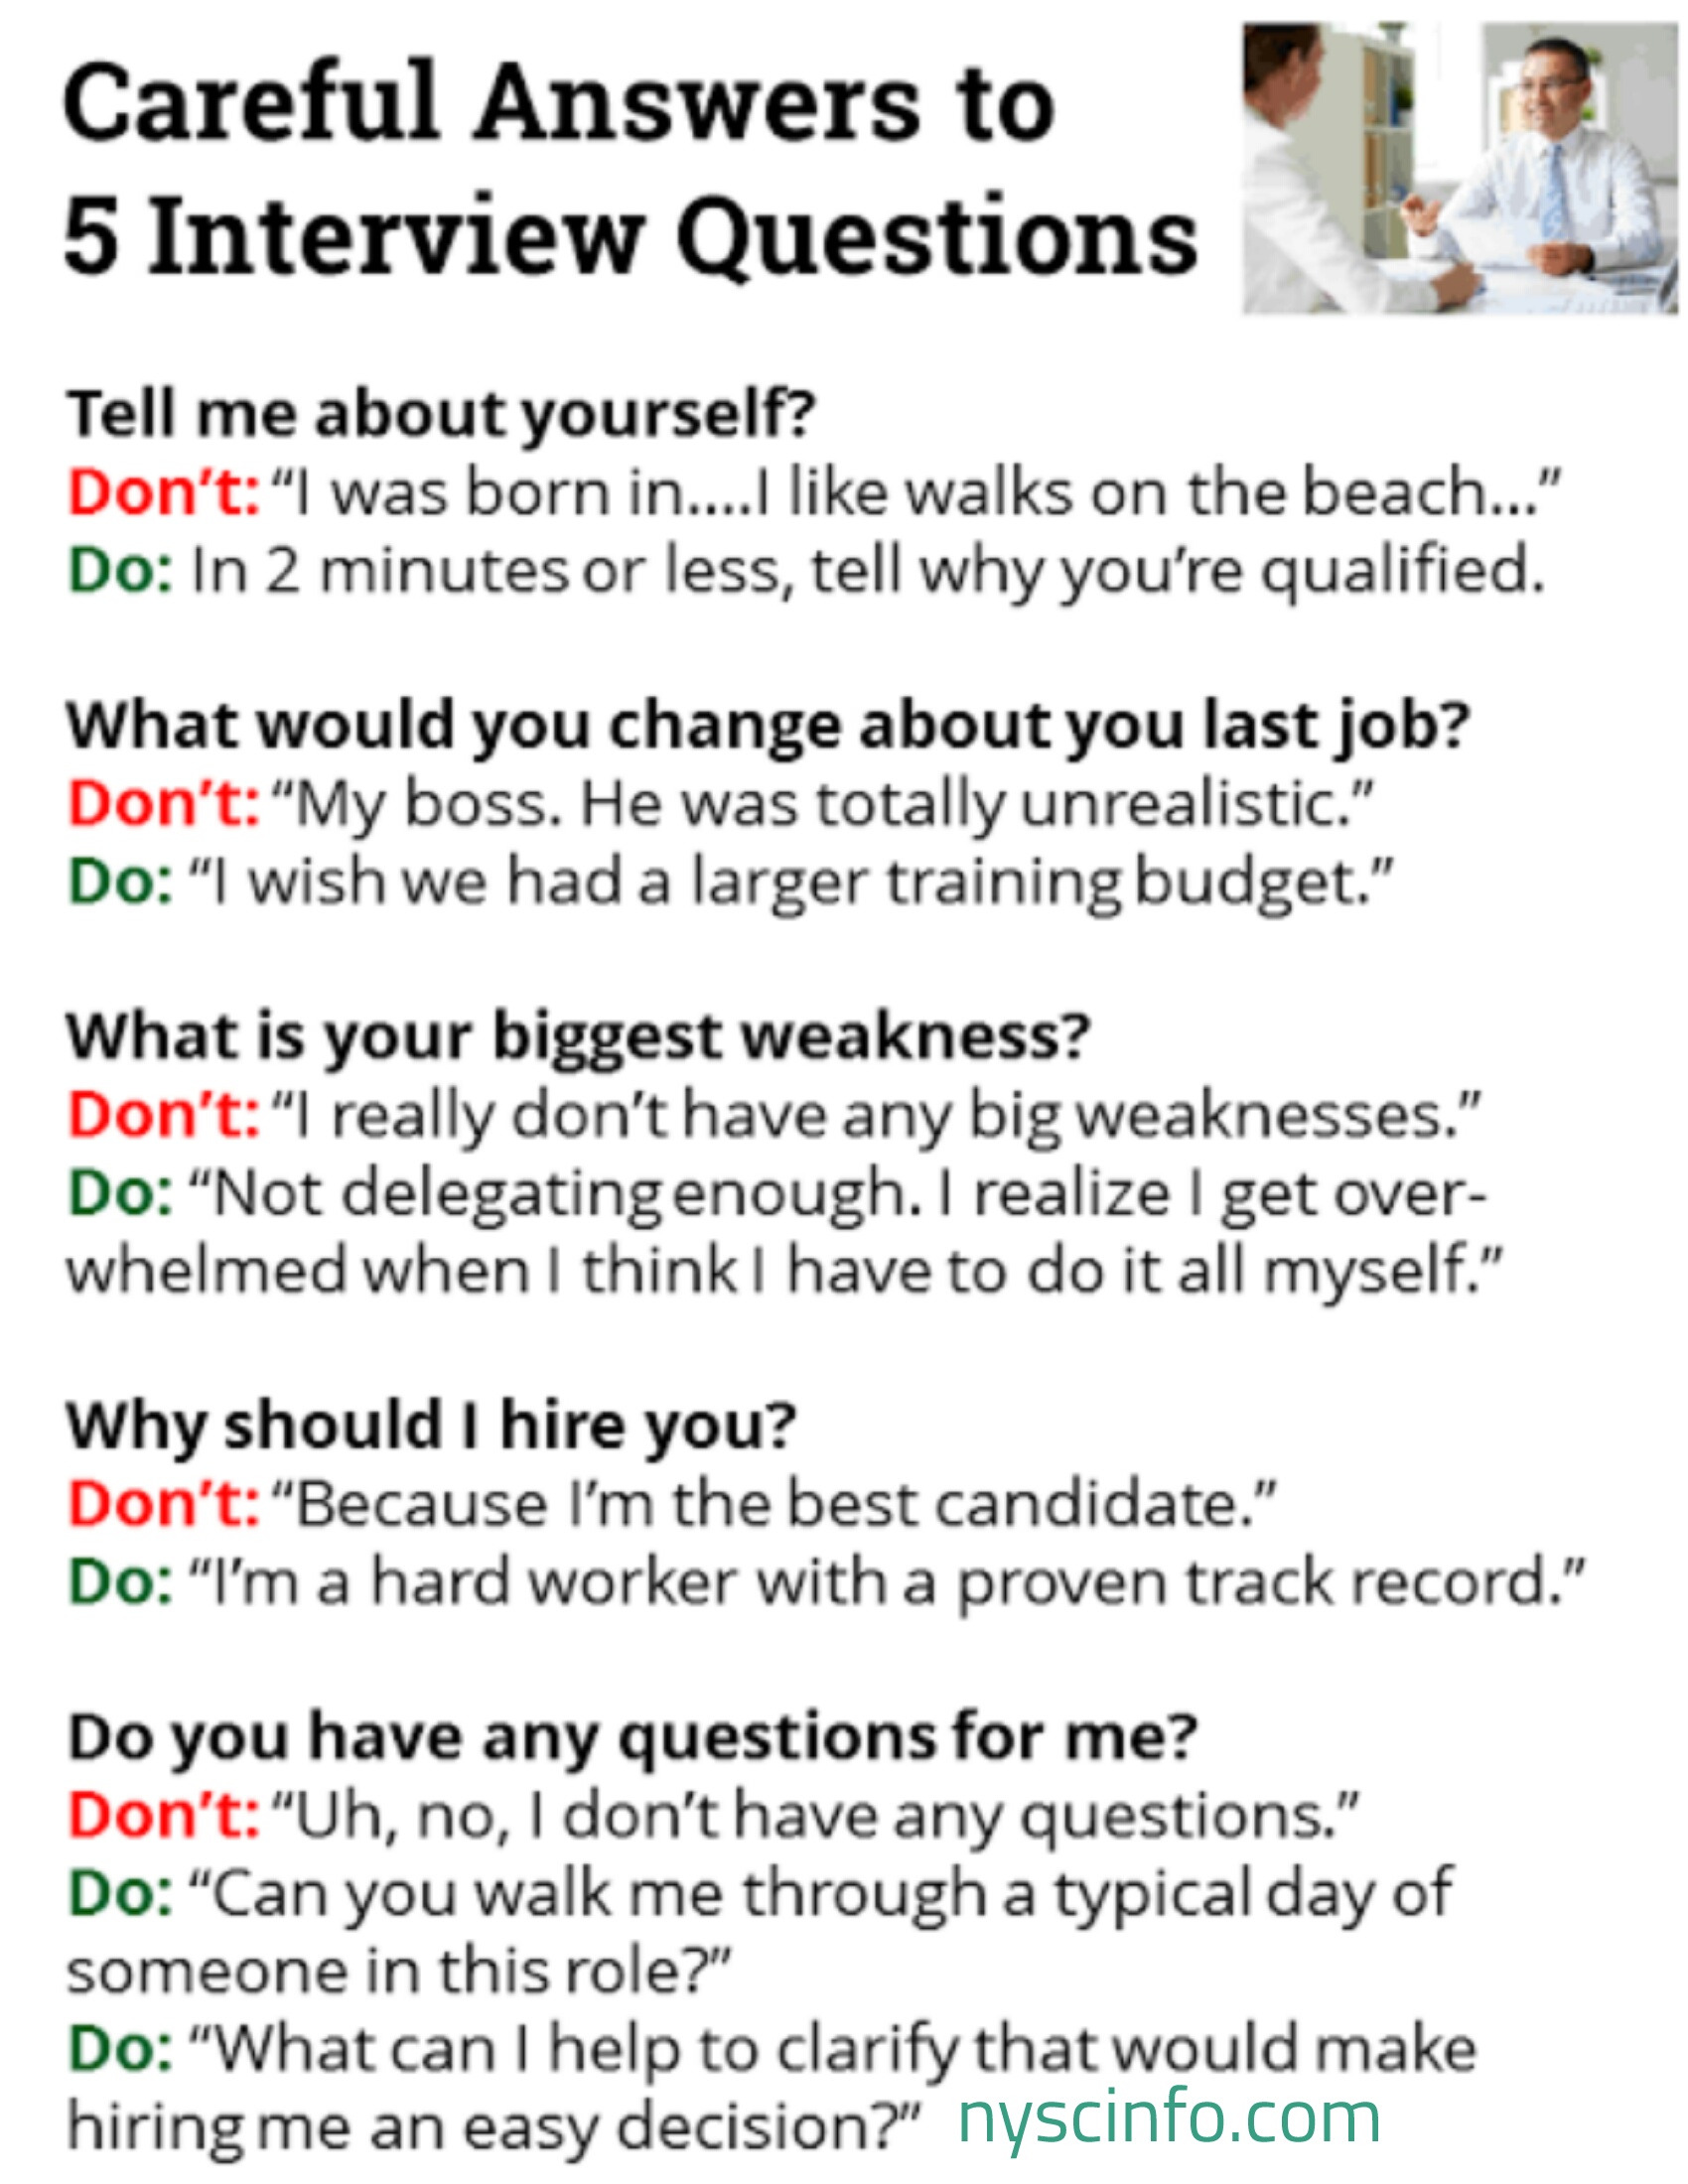 Top Interview Questions And Tips Interview Skills Top Interview